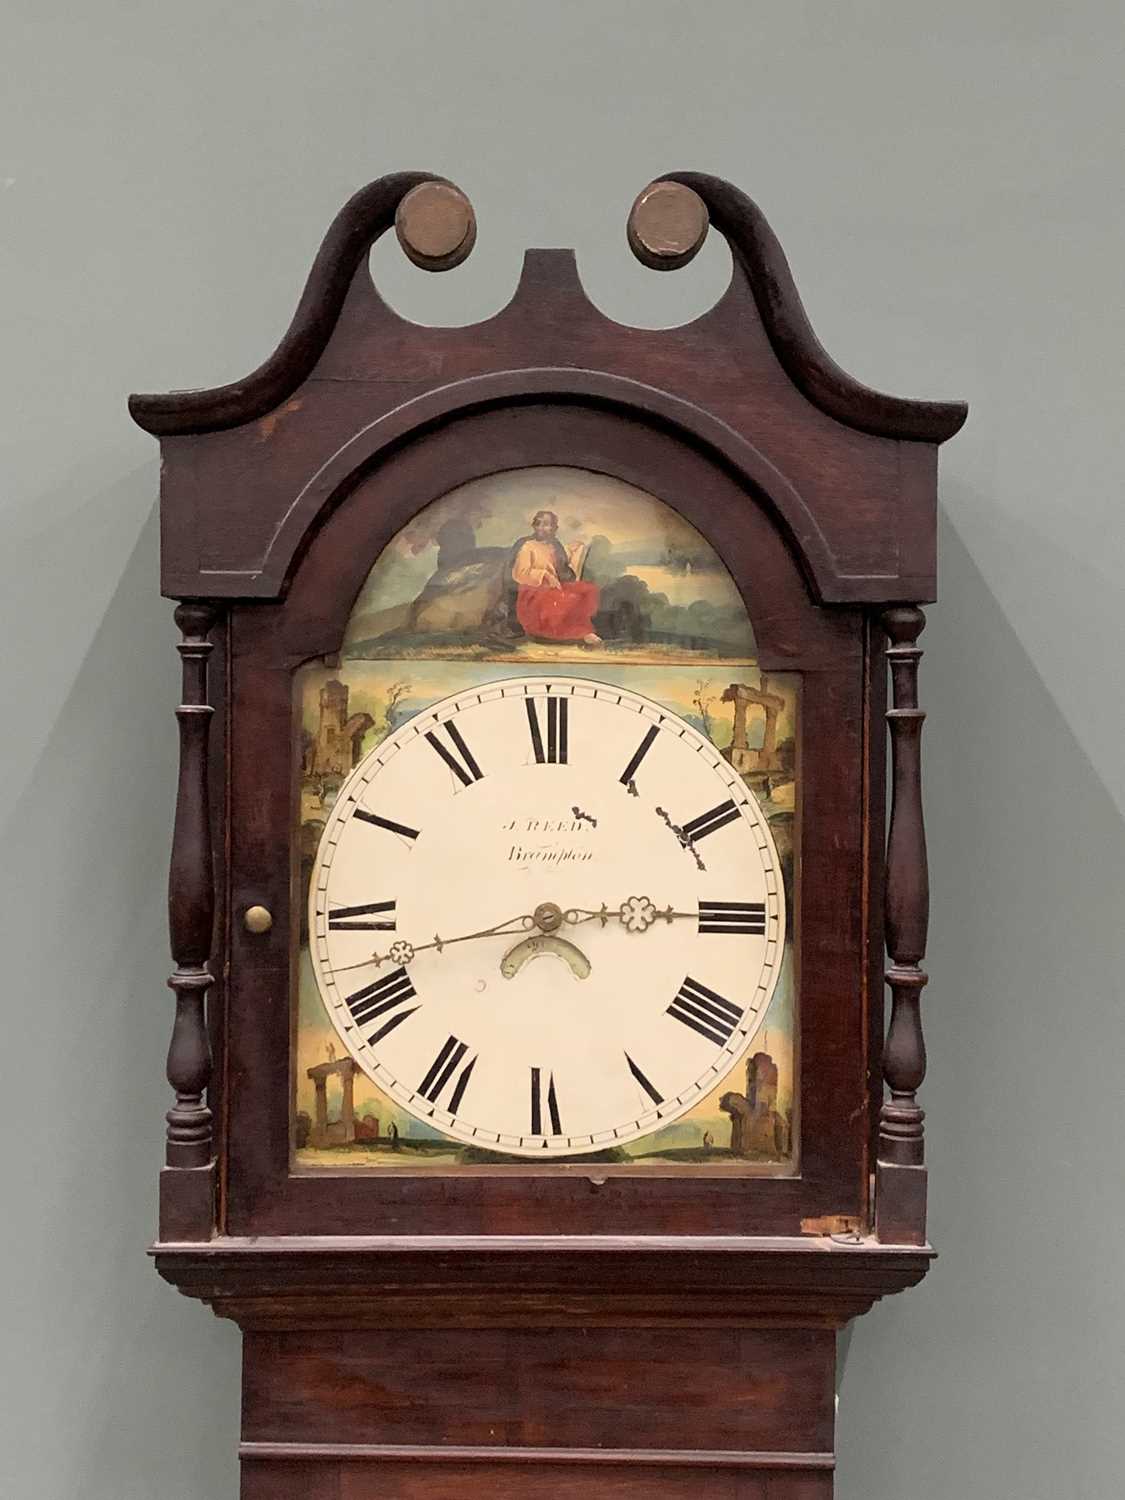 J REED BRAMPTON LONGCASE CLOCK circa 1850, arched top painted dial, Roman numerals, subsidiary